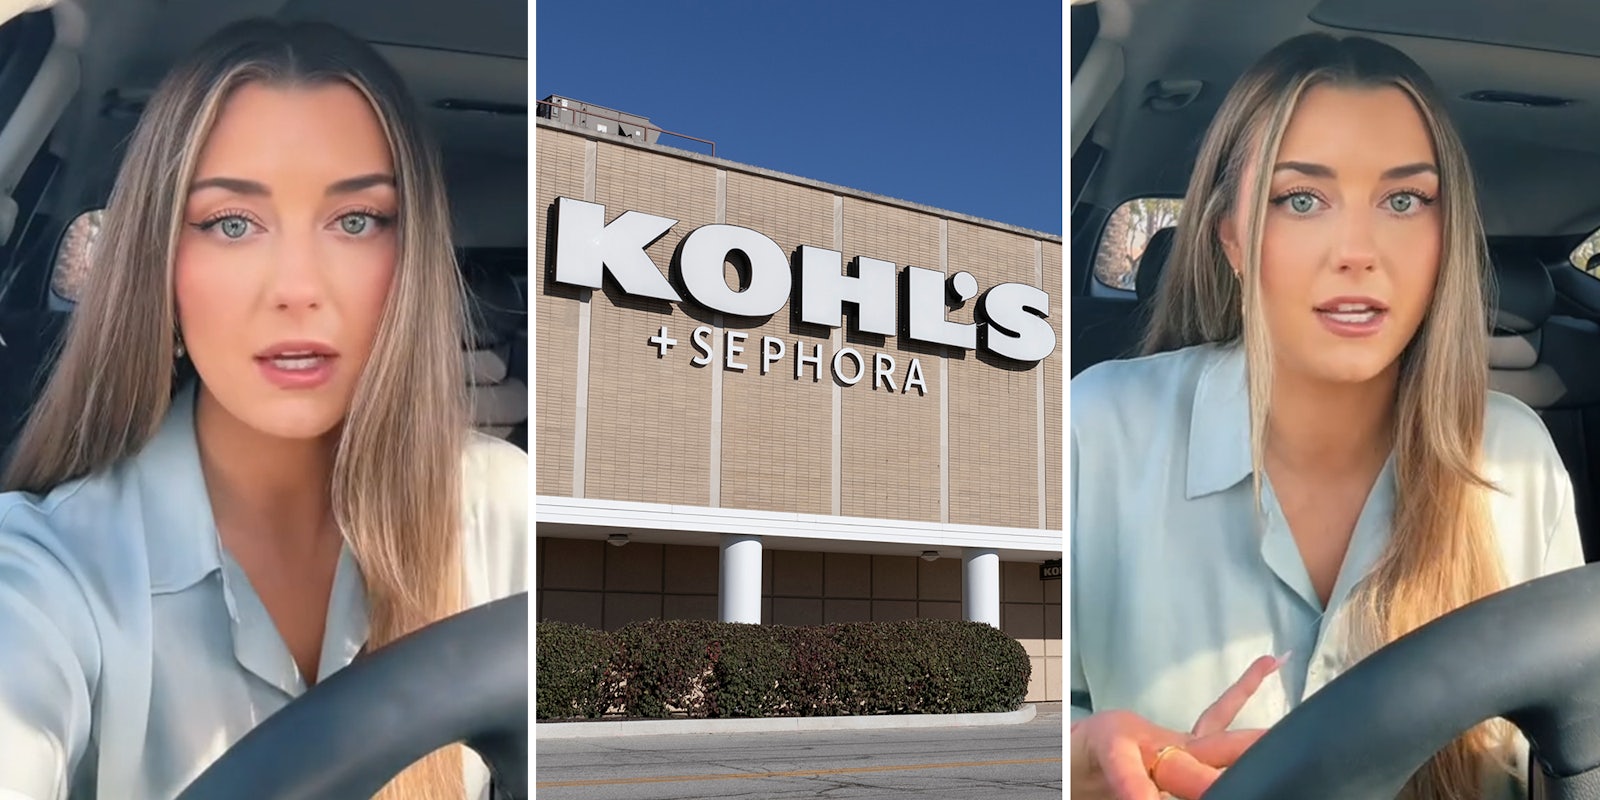 Sephora at Kohl’s shopper experiences medical emergency while shopping—and asks for a lawyer